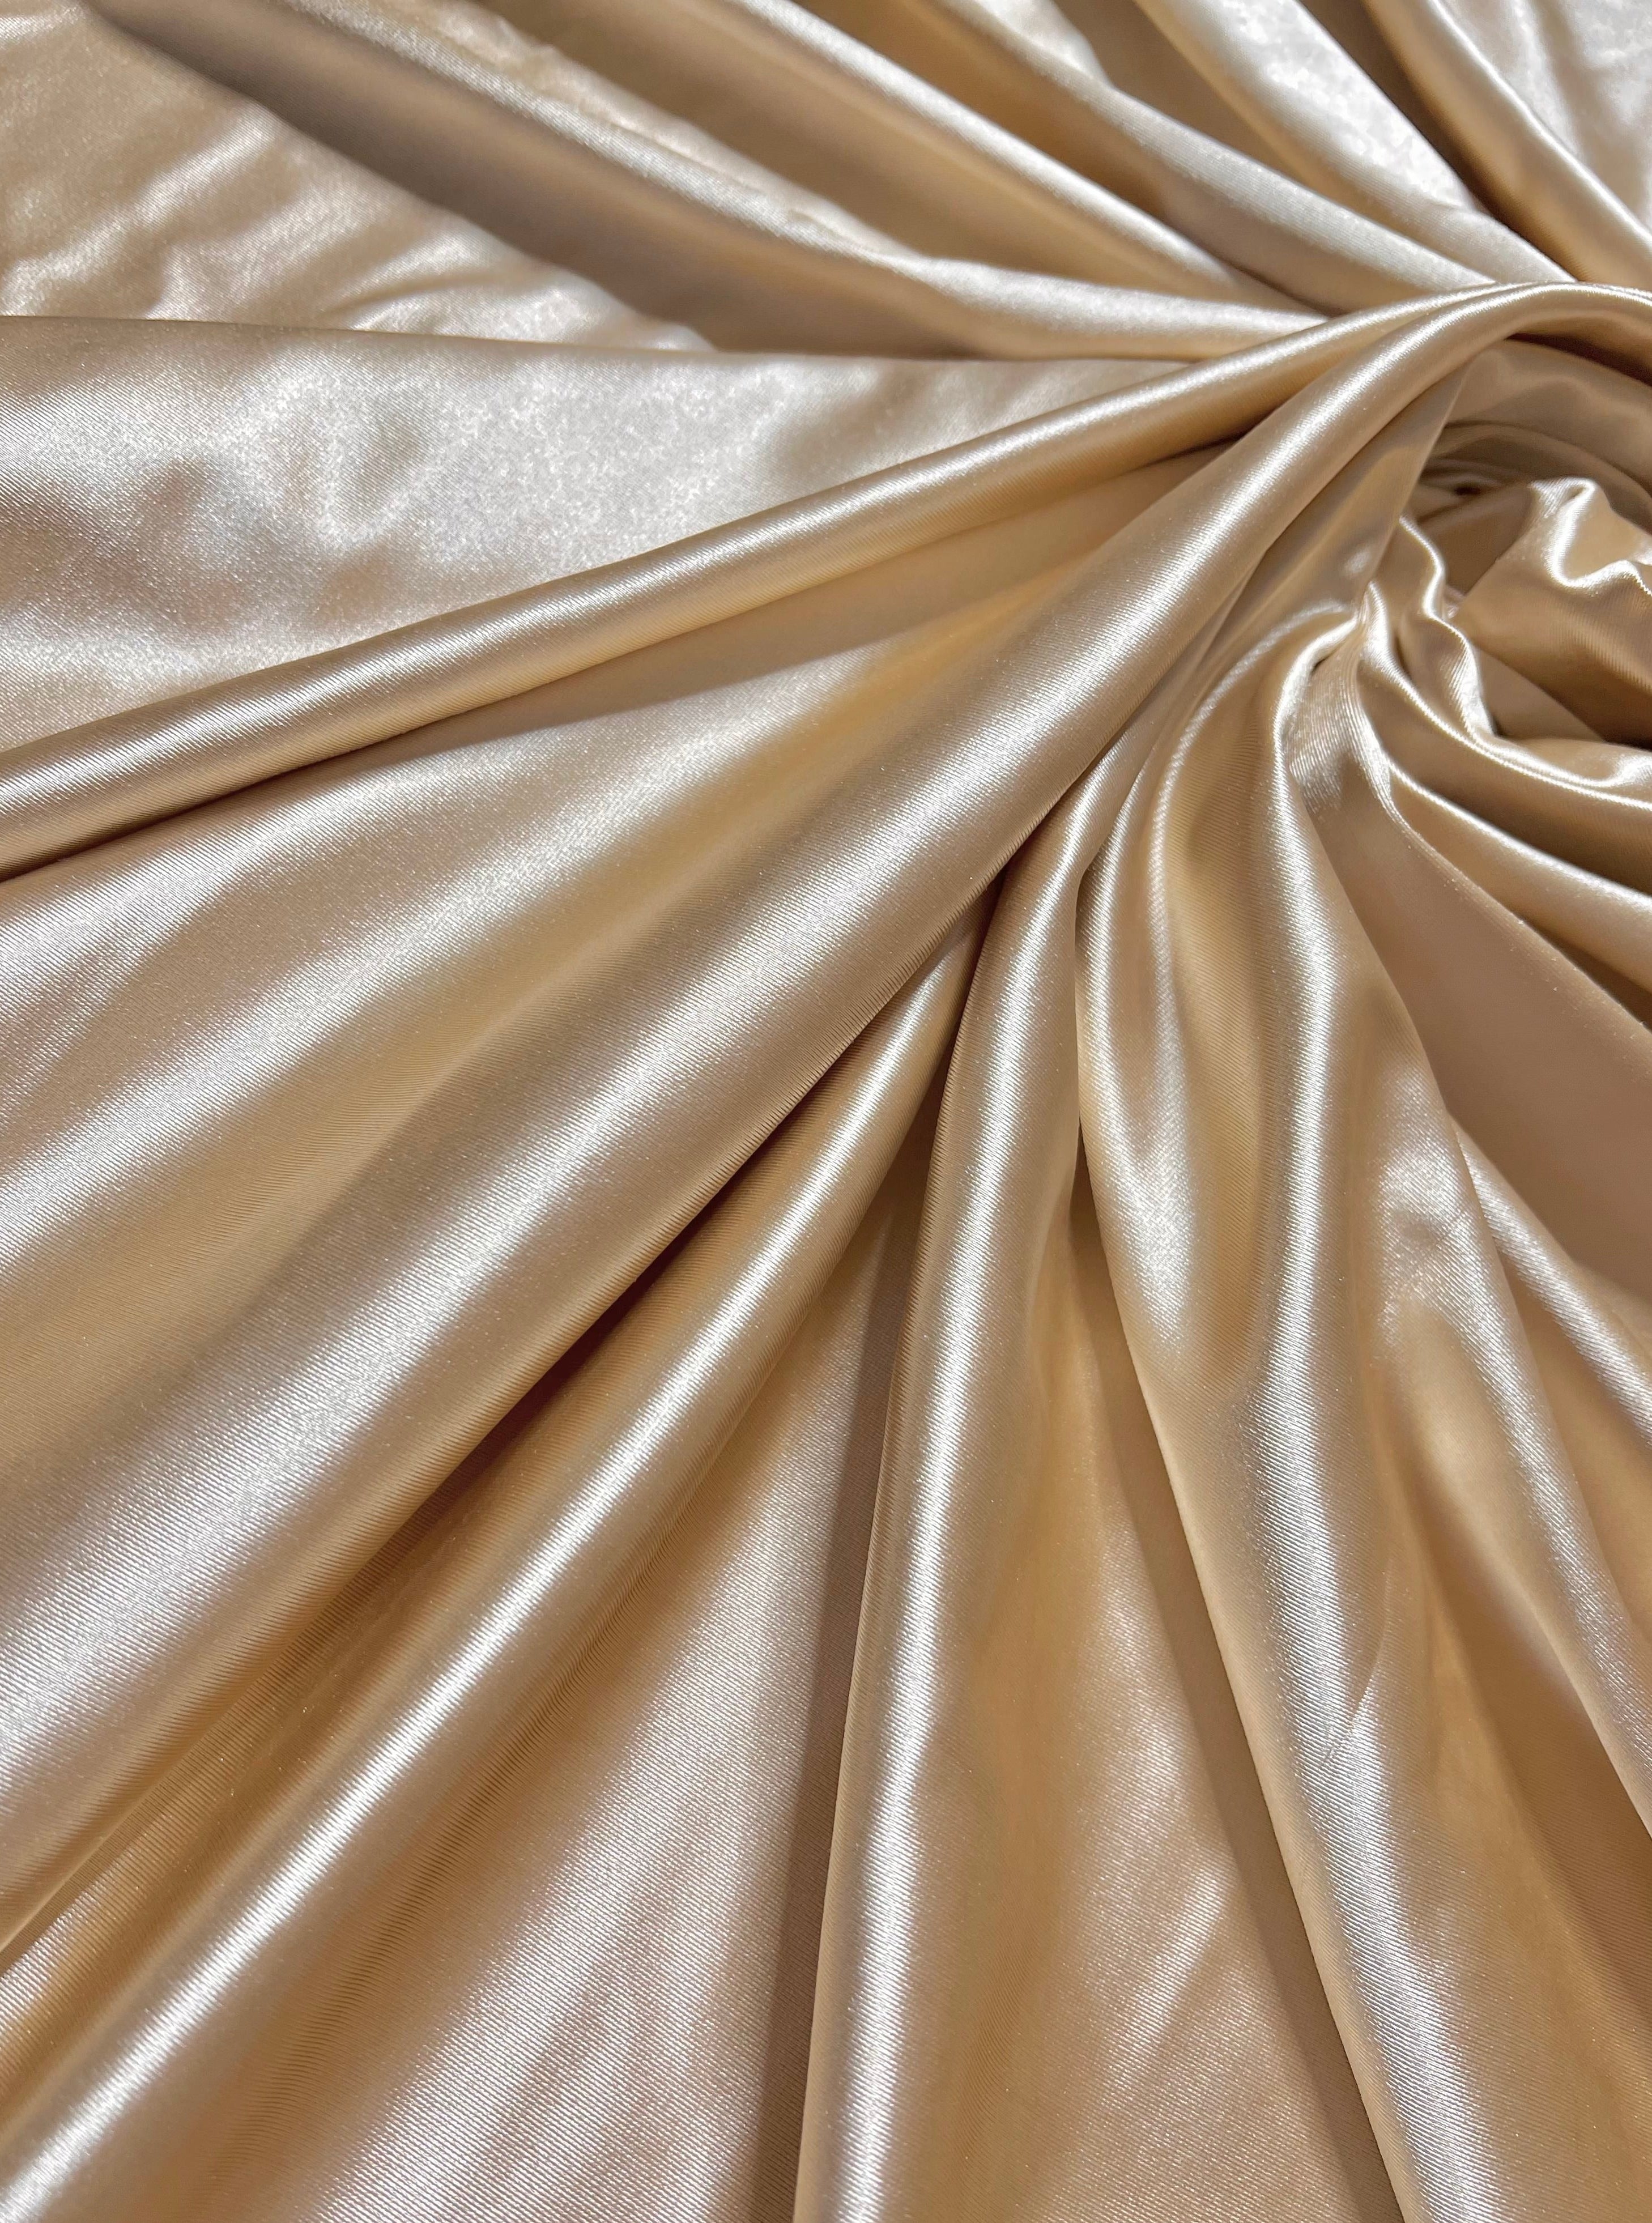 taupe nylon spandex, taupe color fabric, gold nylon spandex, light gold spandex, gold stretch fabric, gold fabric for legging, fabric wholesale USA, online fabric for legging, 4 way stretch fabric,premium nylon spandex, nylon spandex for woman, nylon spandex for bride, nylon spandex on discount, nylon spandex on sale, buy nylon spandex online